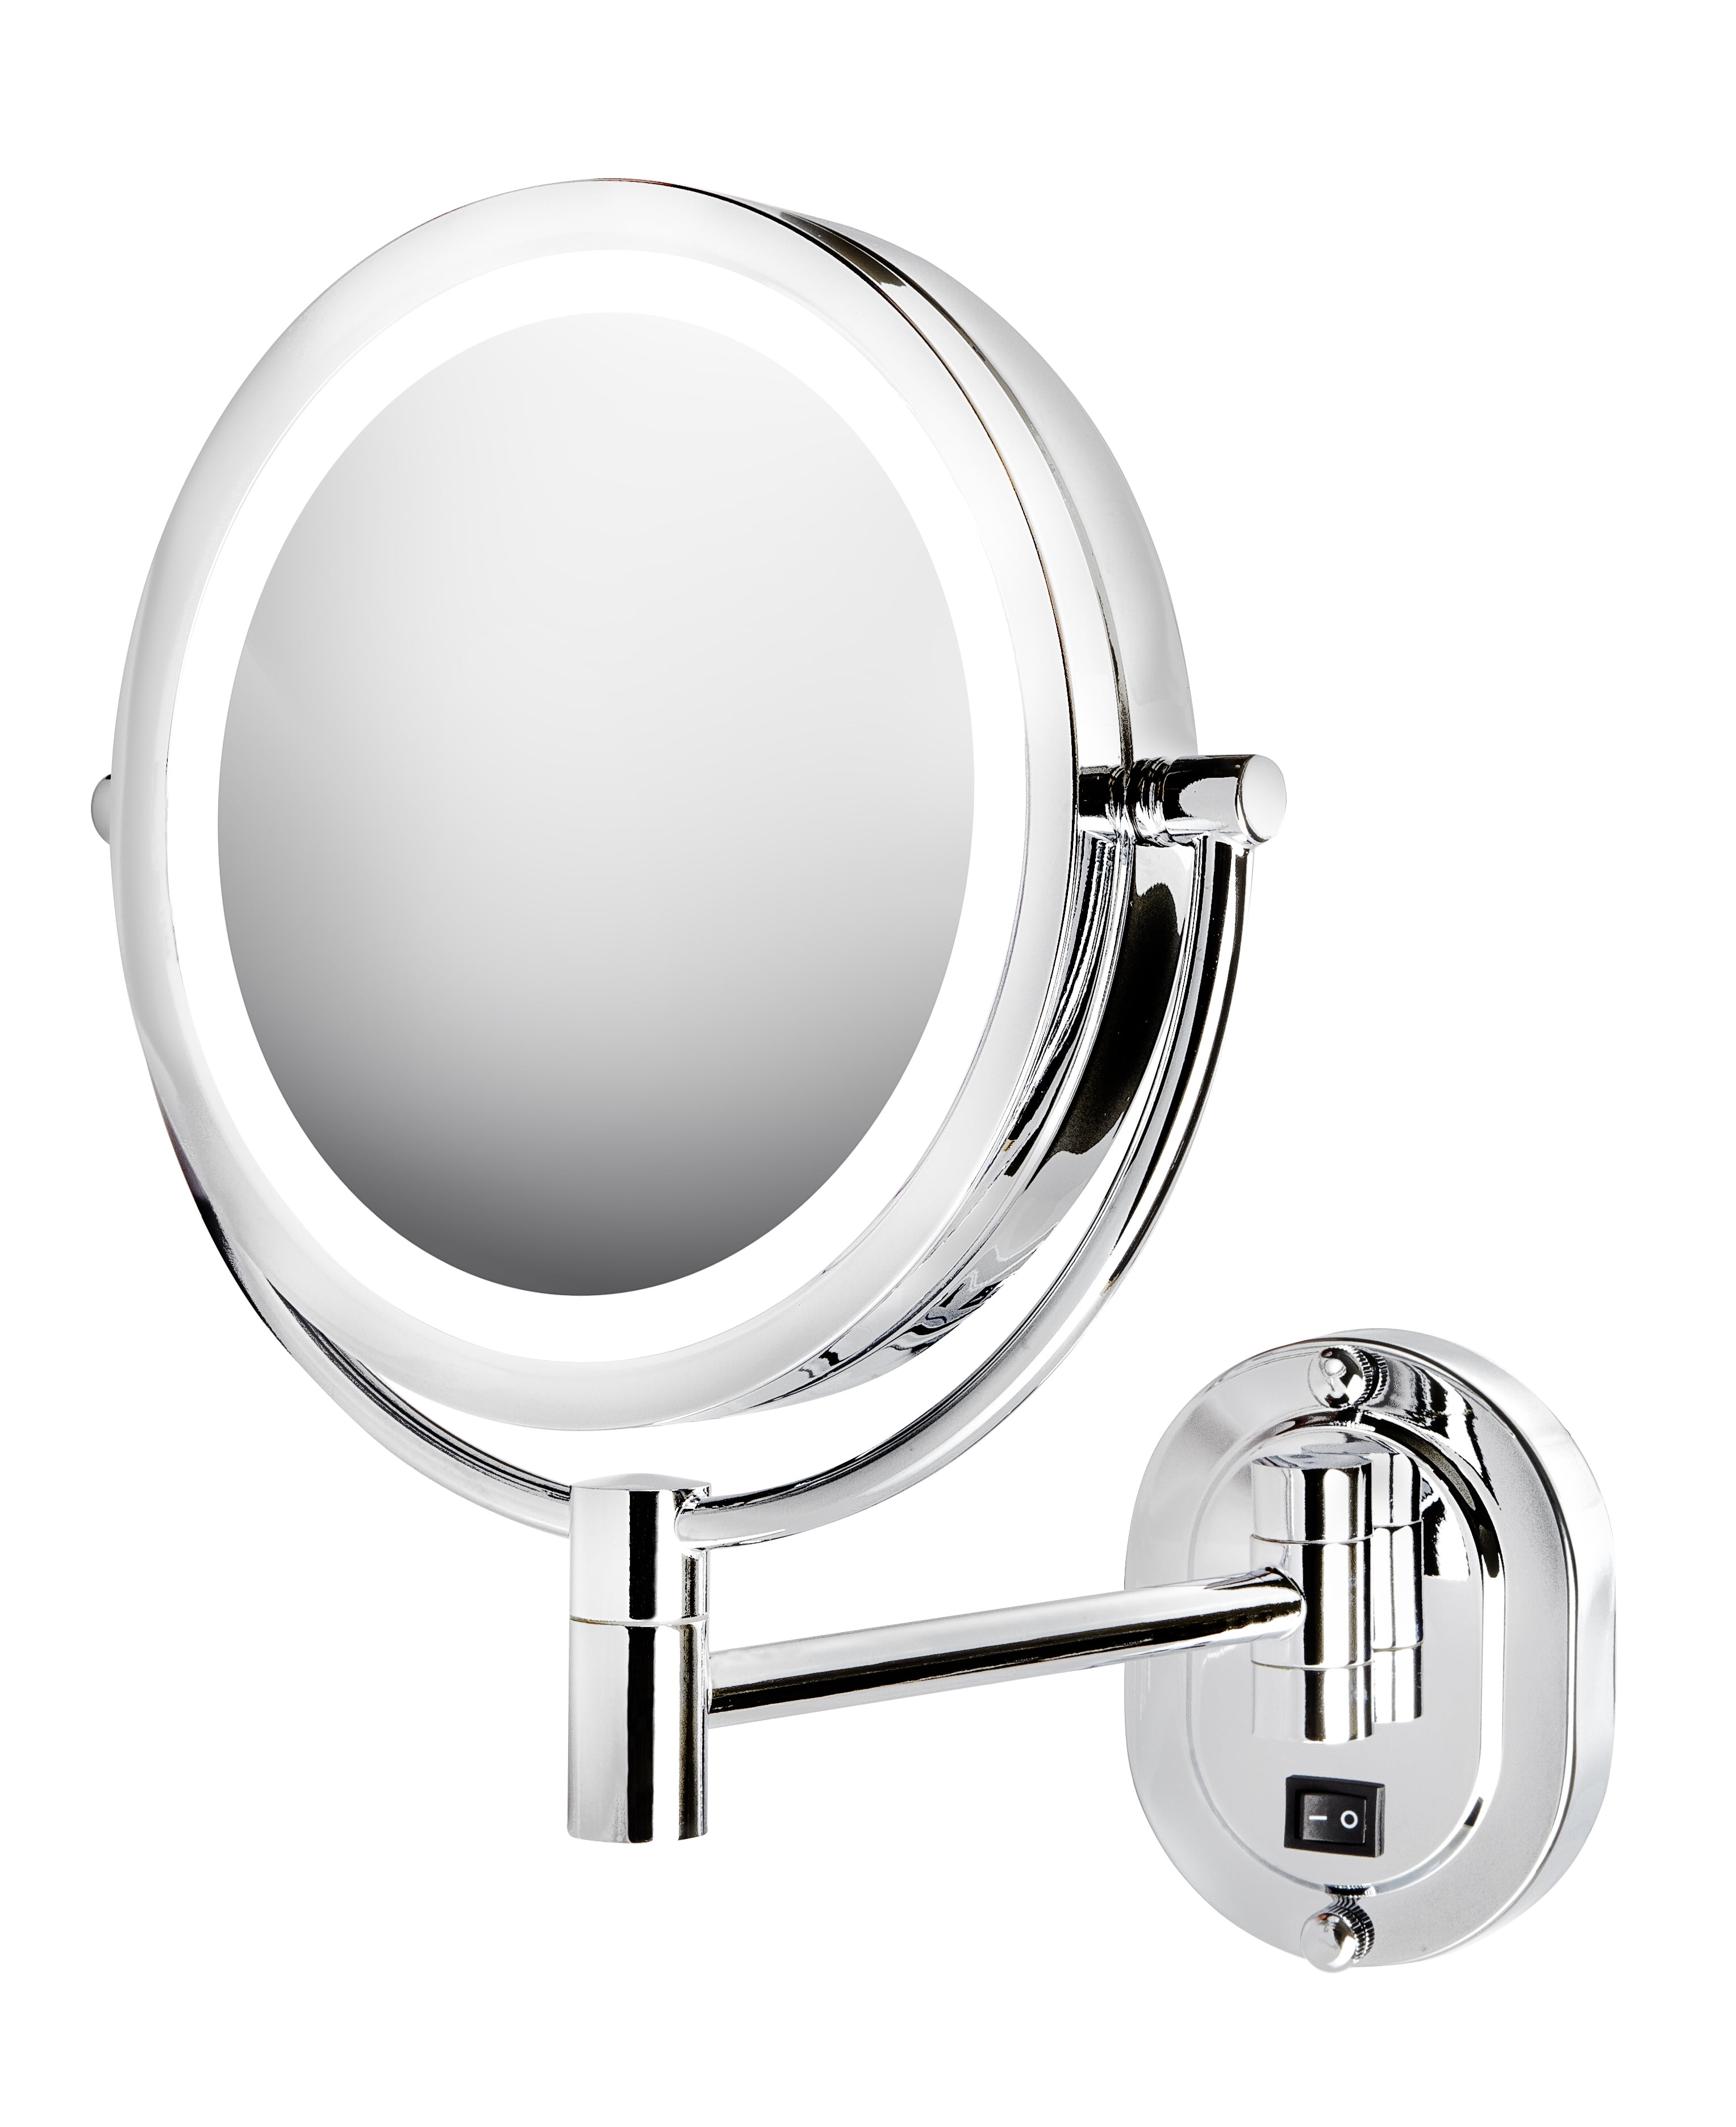 Jerdon Hl165cld 5x 1x Magnification 8, Best Wall Mounted Lighted Make Up Mirror